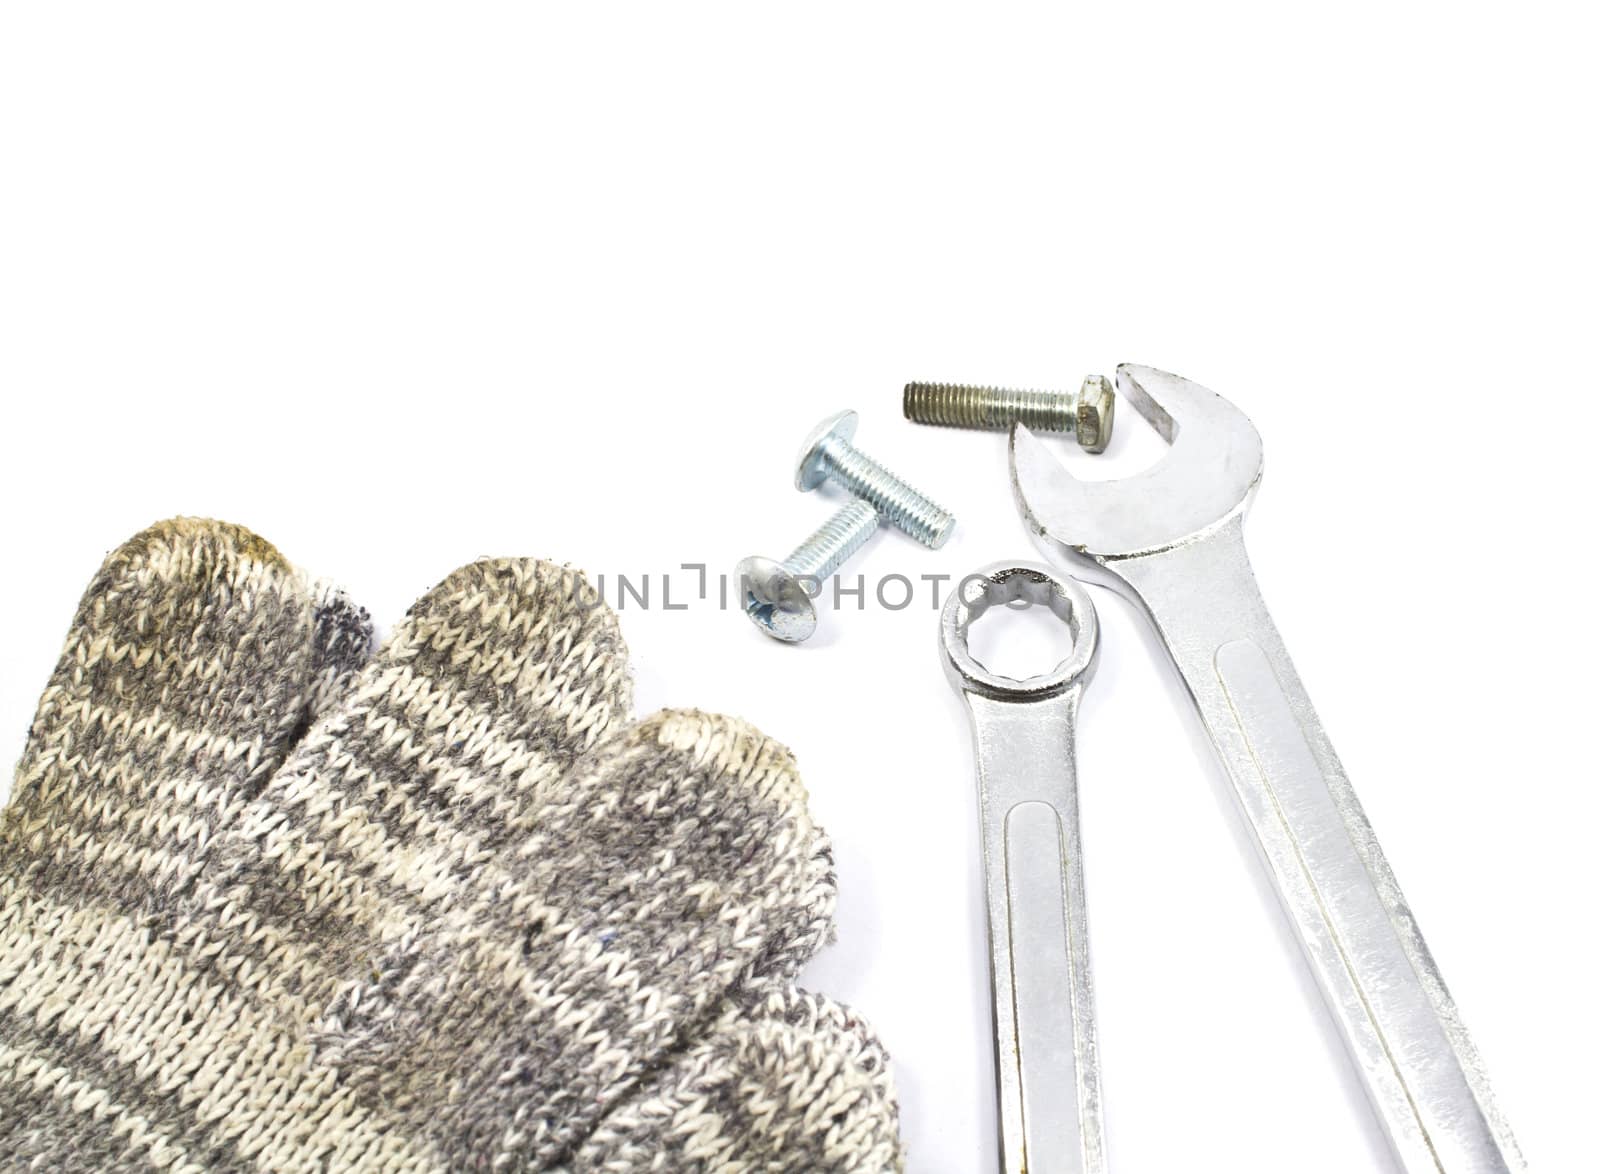 Chrome Vanadium spanner or wrench with new and old nuts and bolts.